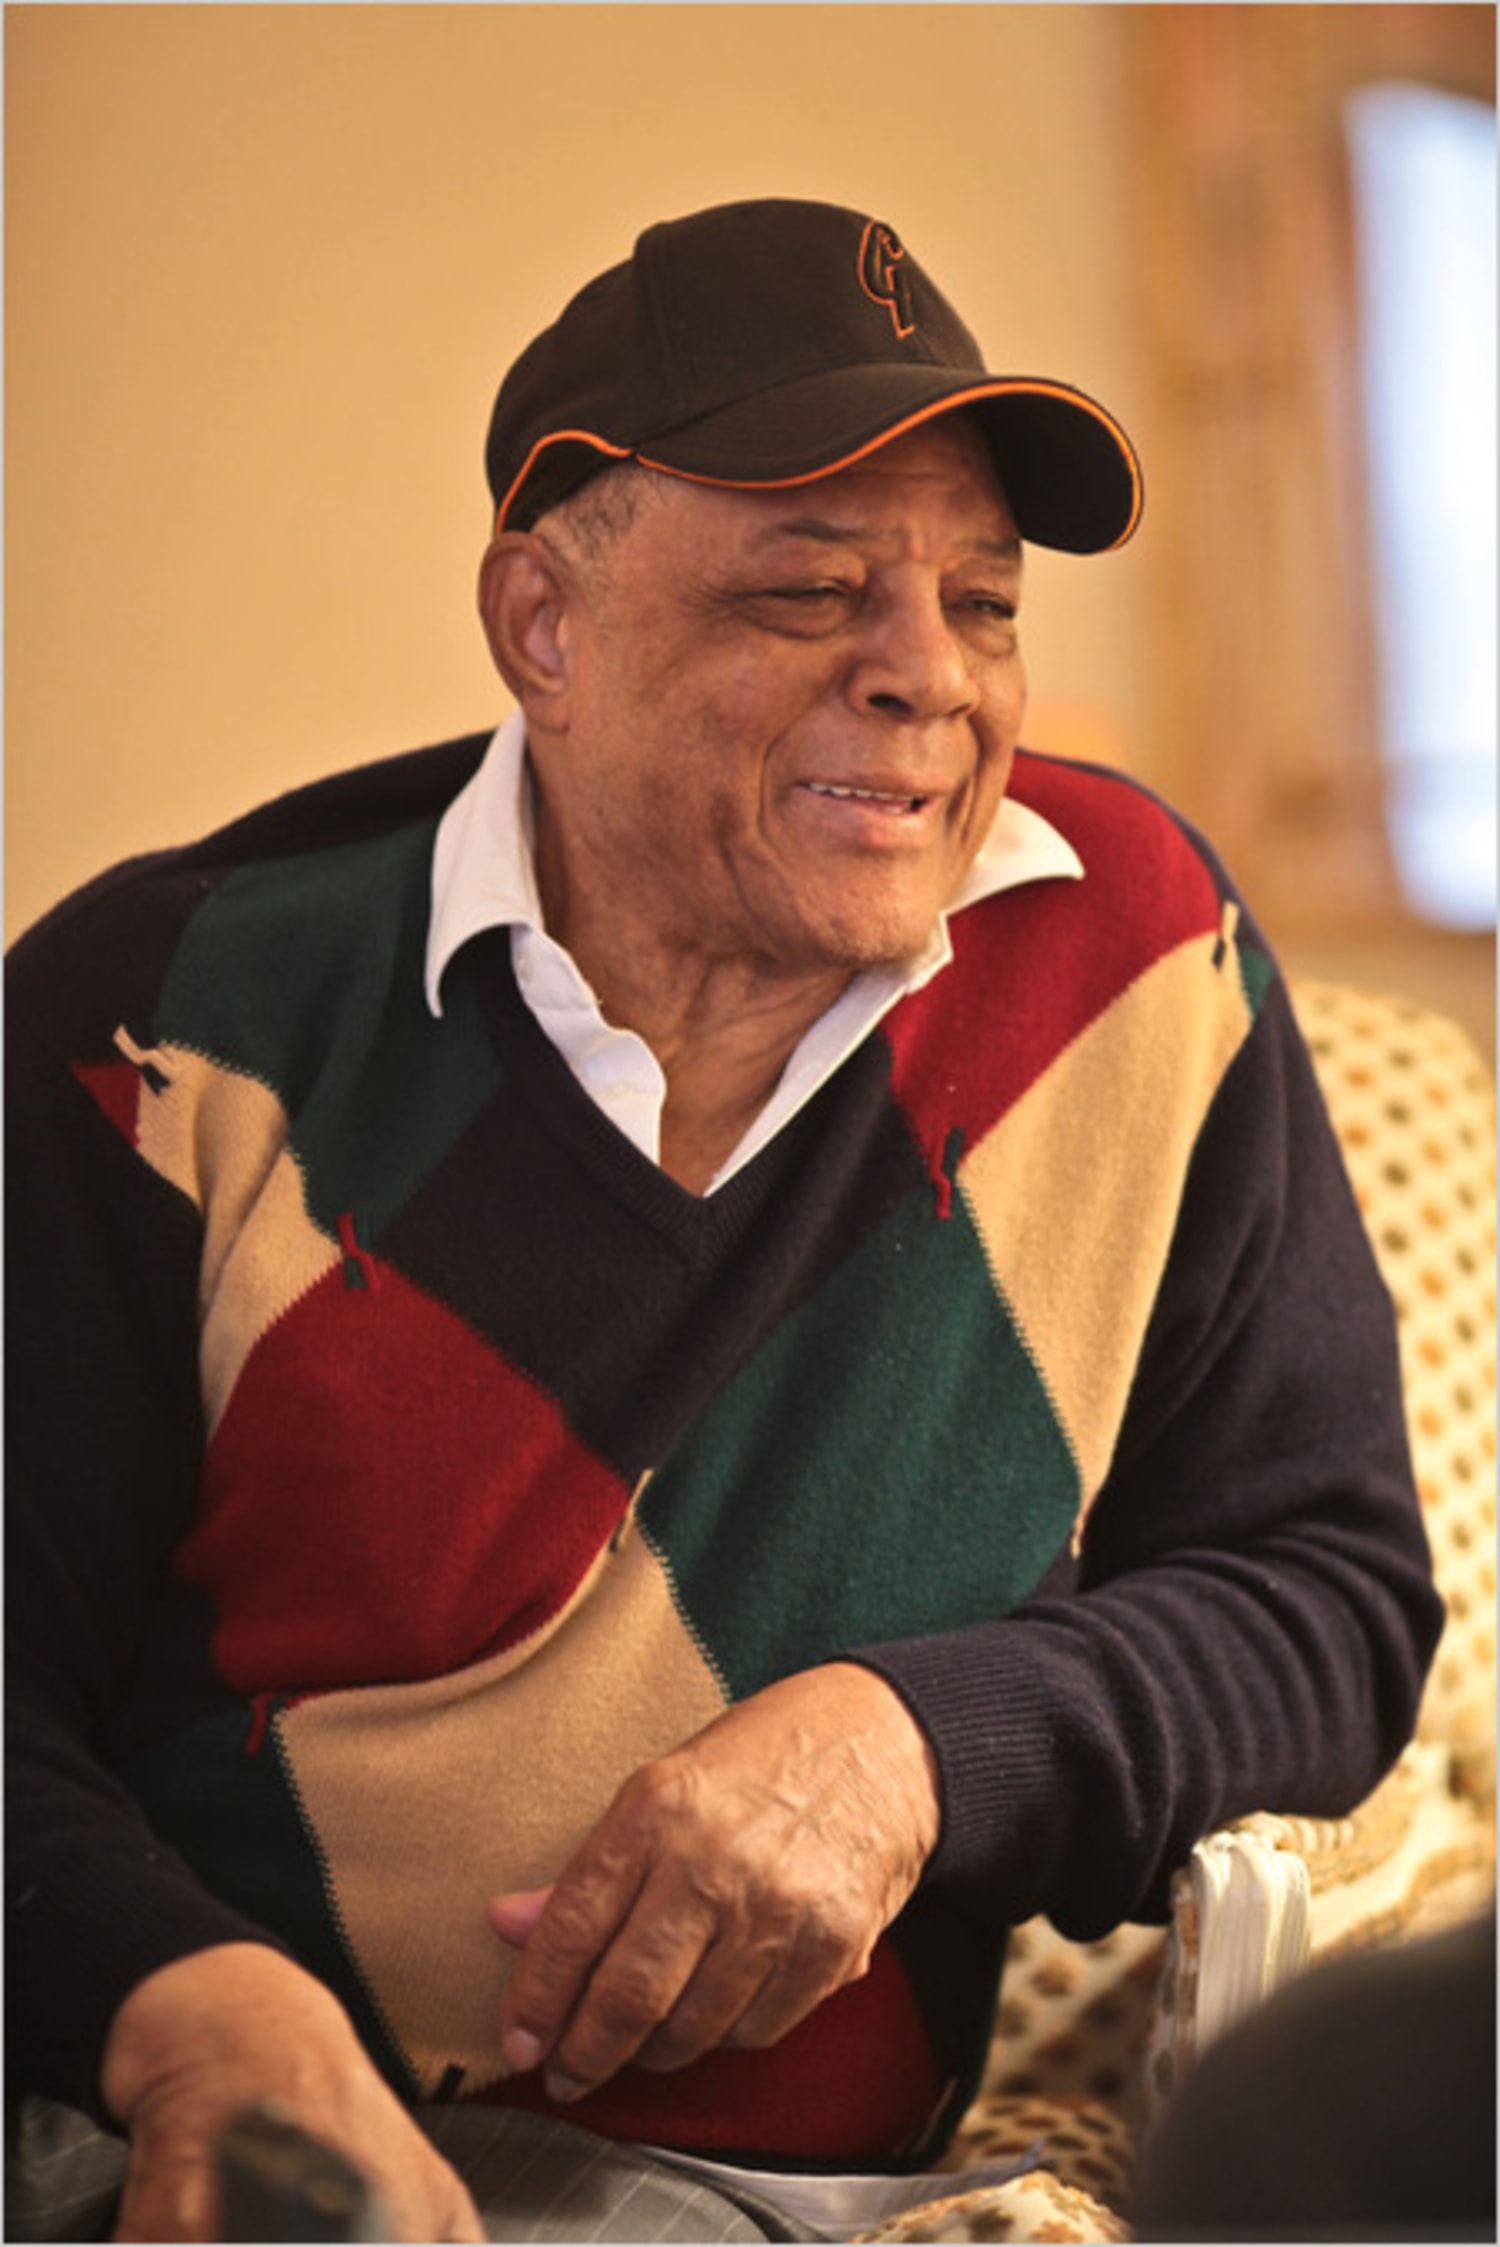 At 78, Willie Mays decides to share his story